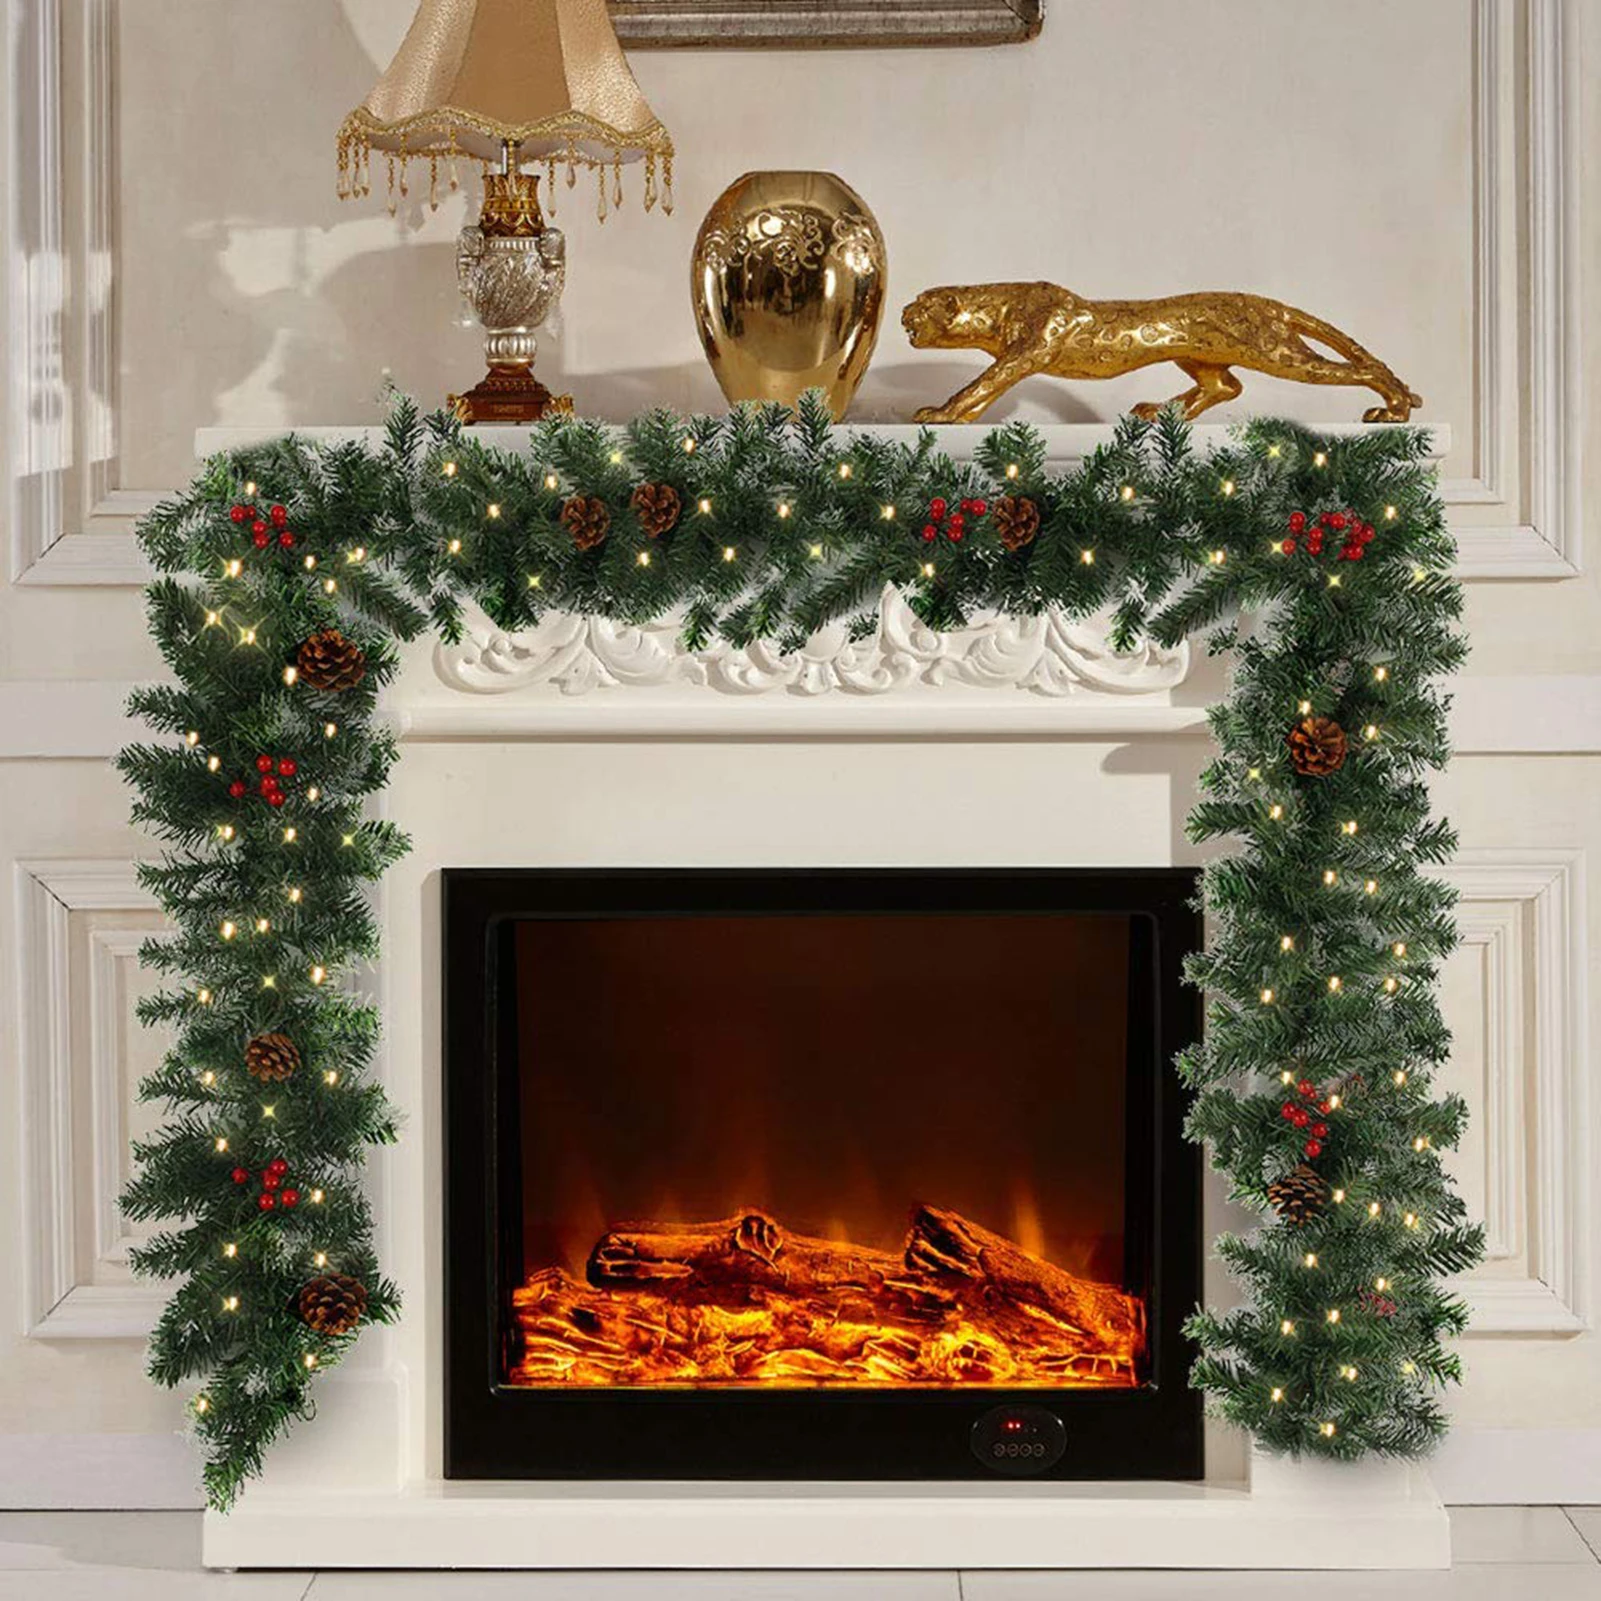 Christmas Garland Decorations Greenery Outdoor Lighted Pine Garland Holiday Xmas Ornament Mantle Fireplace Flame-resistant